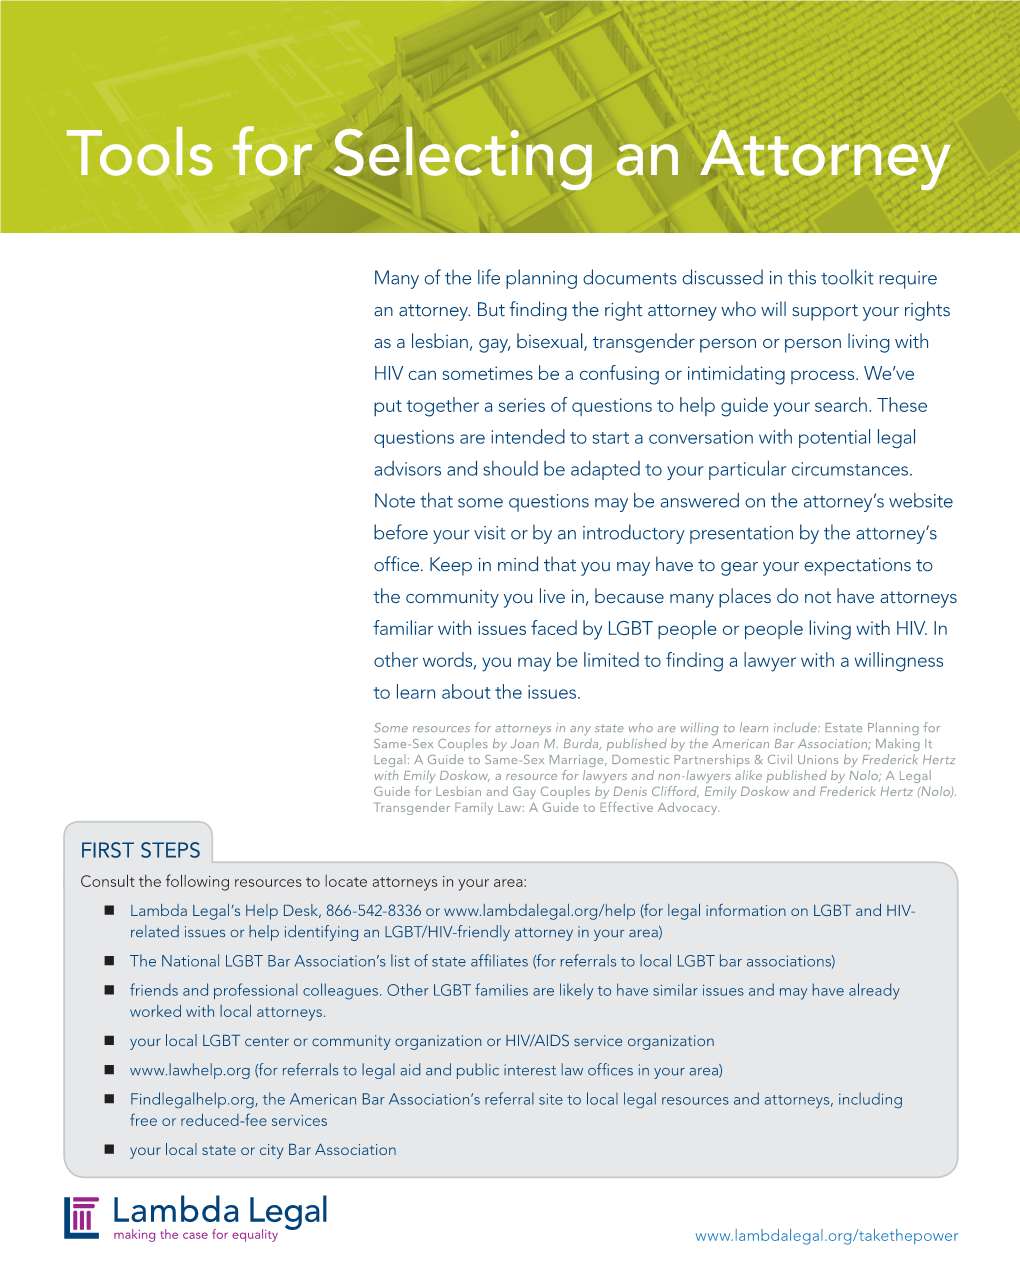 Tools for Selecting an Attorney